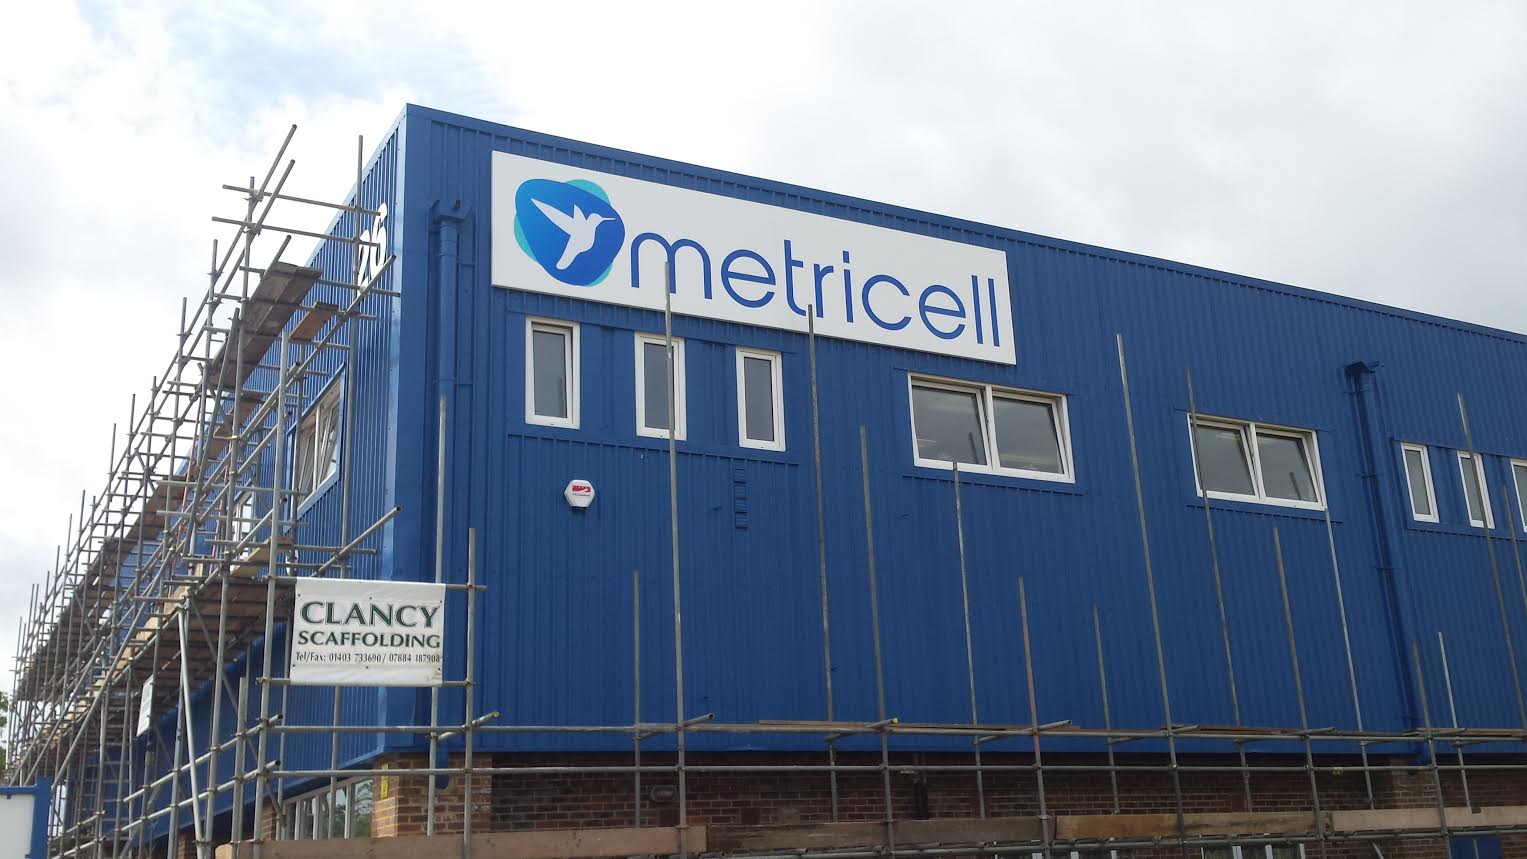 Outdoor signage of Metricell offices